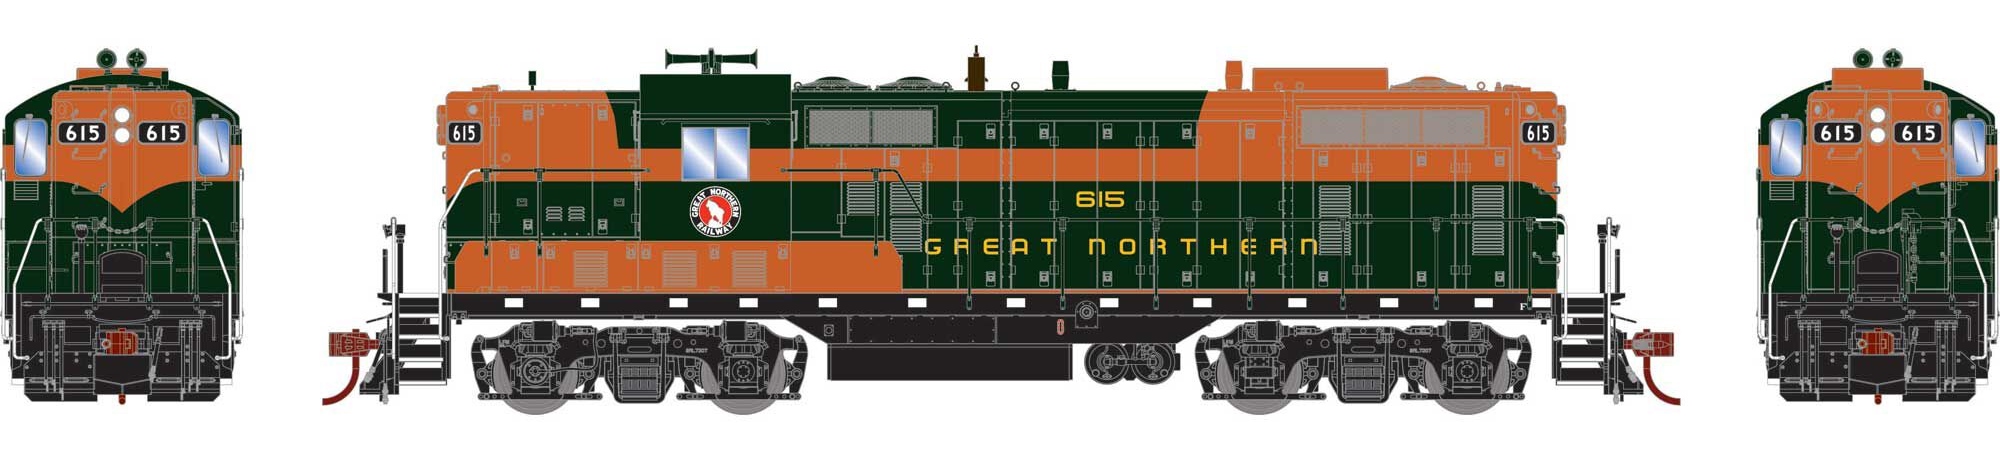 Athearn Genesis HO ATHG82354 DCC/Tsunami 2 Equipped EMD GP7 Great Northern GN #615